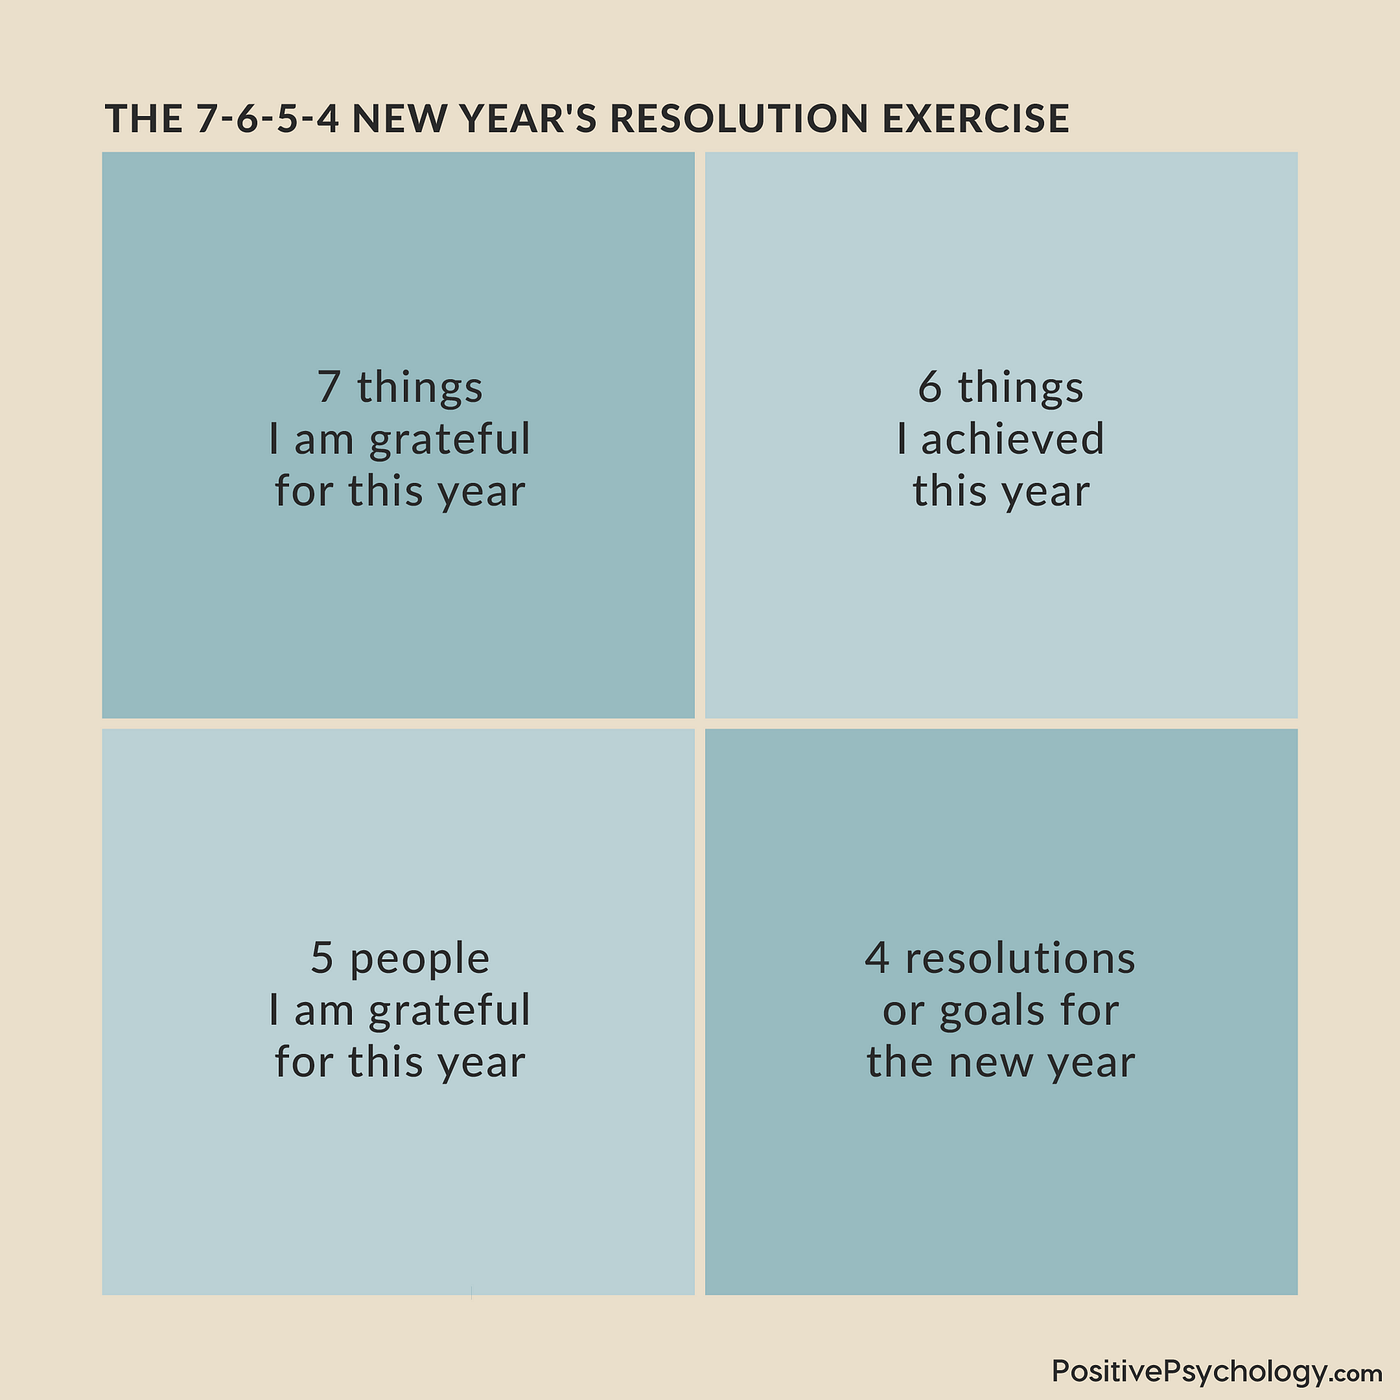 The Most Effective Workout for All Y'all New Year's Resolutioners